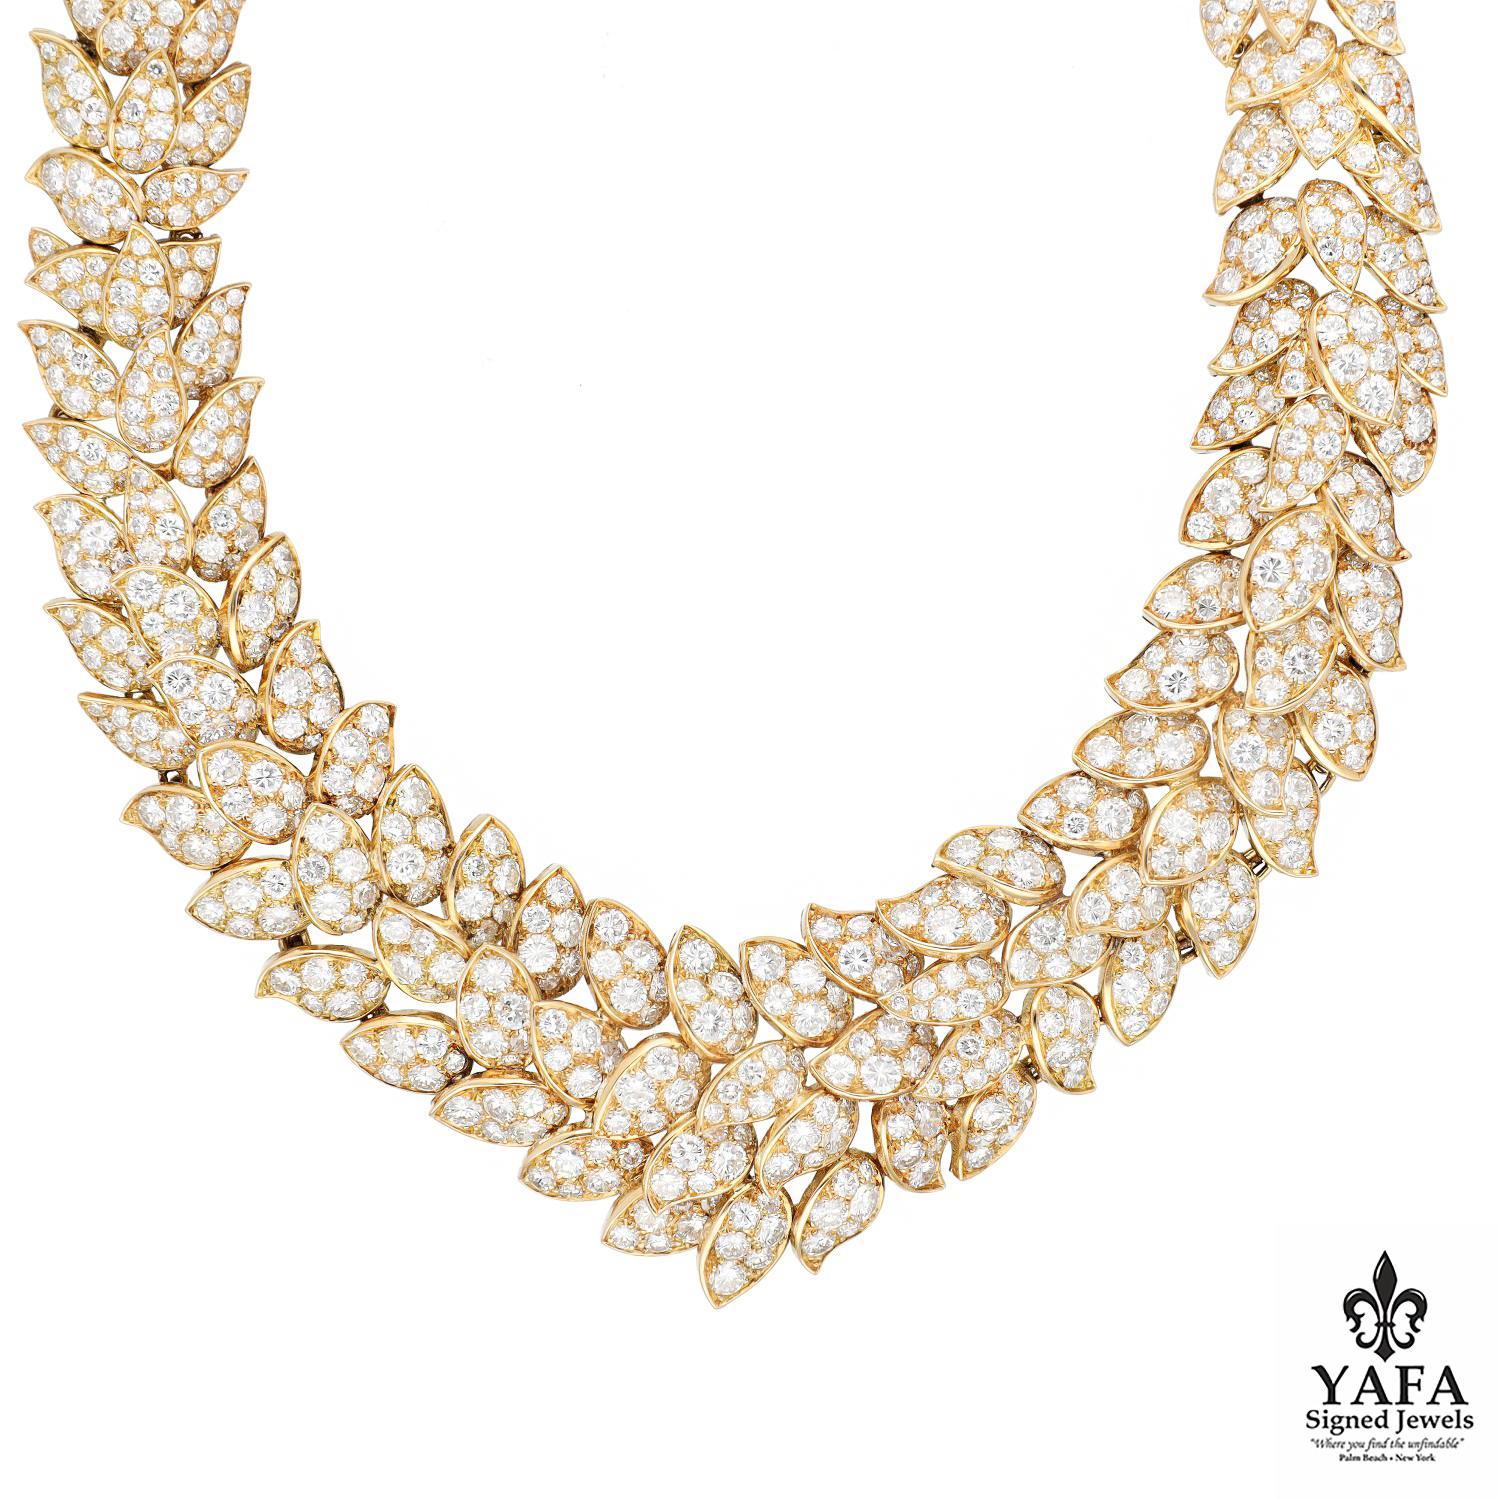 Van Cleef & Arpels Nature Collection - Leaf Motif Diamond Necklace. 
Approximate Diamond Weight - 62.00 CTS
18K Yellow Gold
Circa - 1962
French Assay Marks
Signed - Van Cleef & Arpels